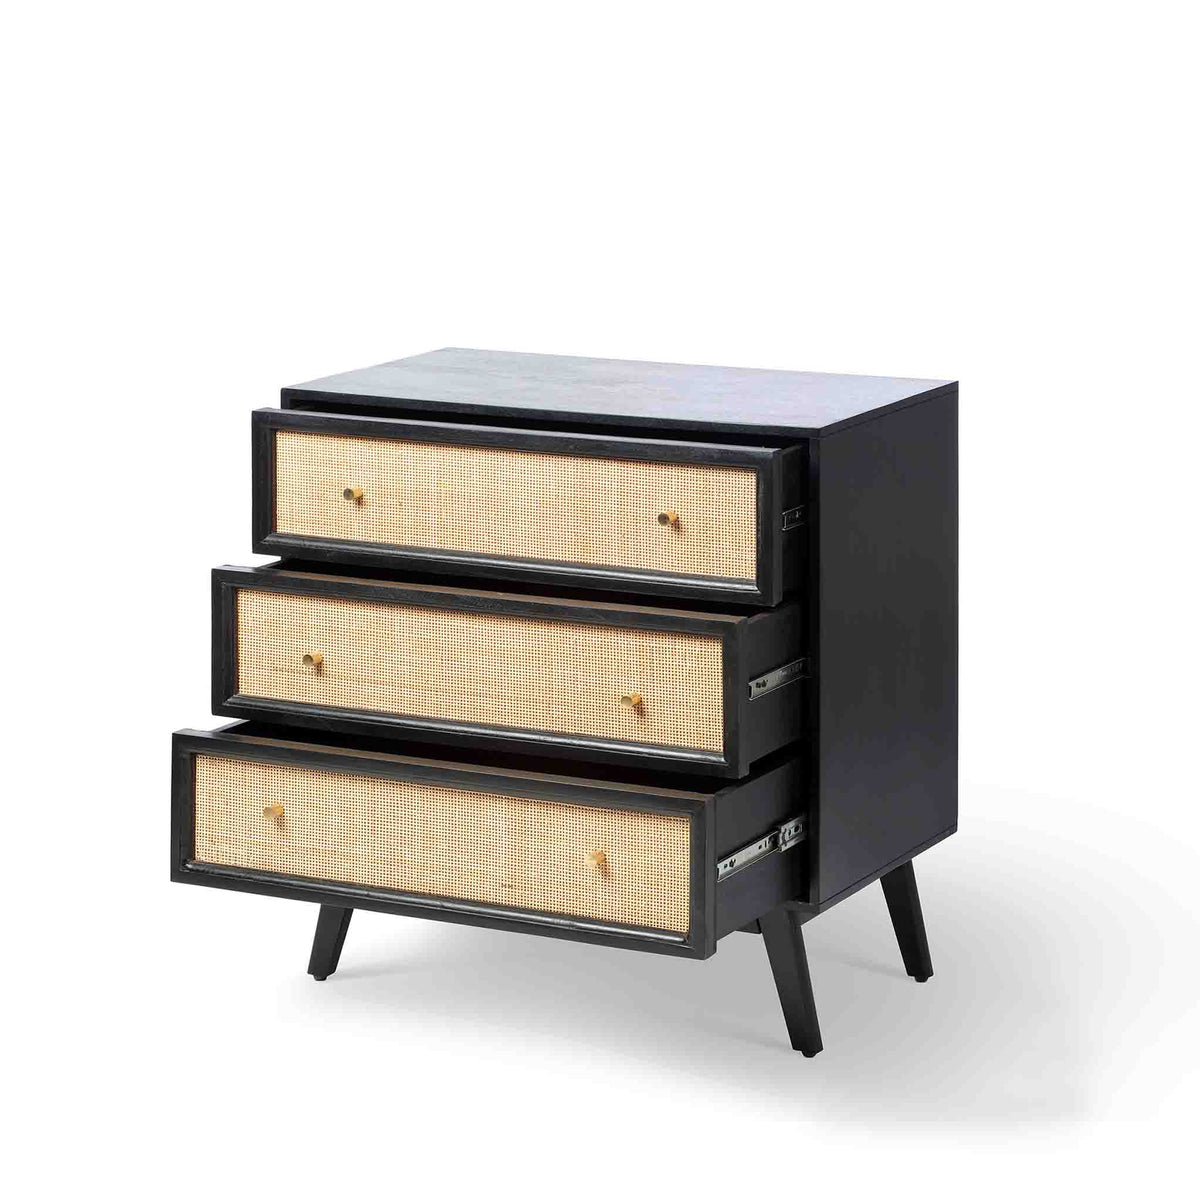 Venti Black Mango Wood & Cane Compact Chest of 3 Drawers